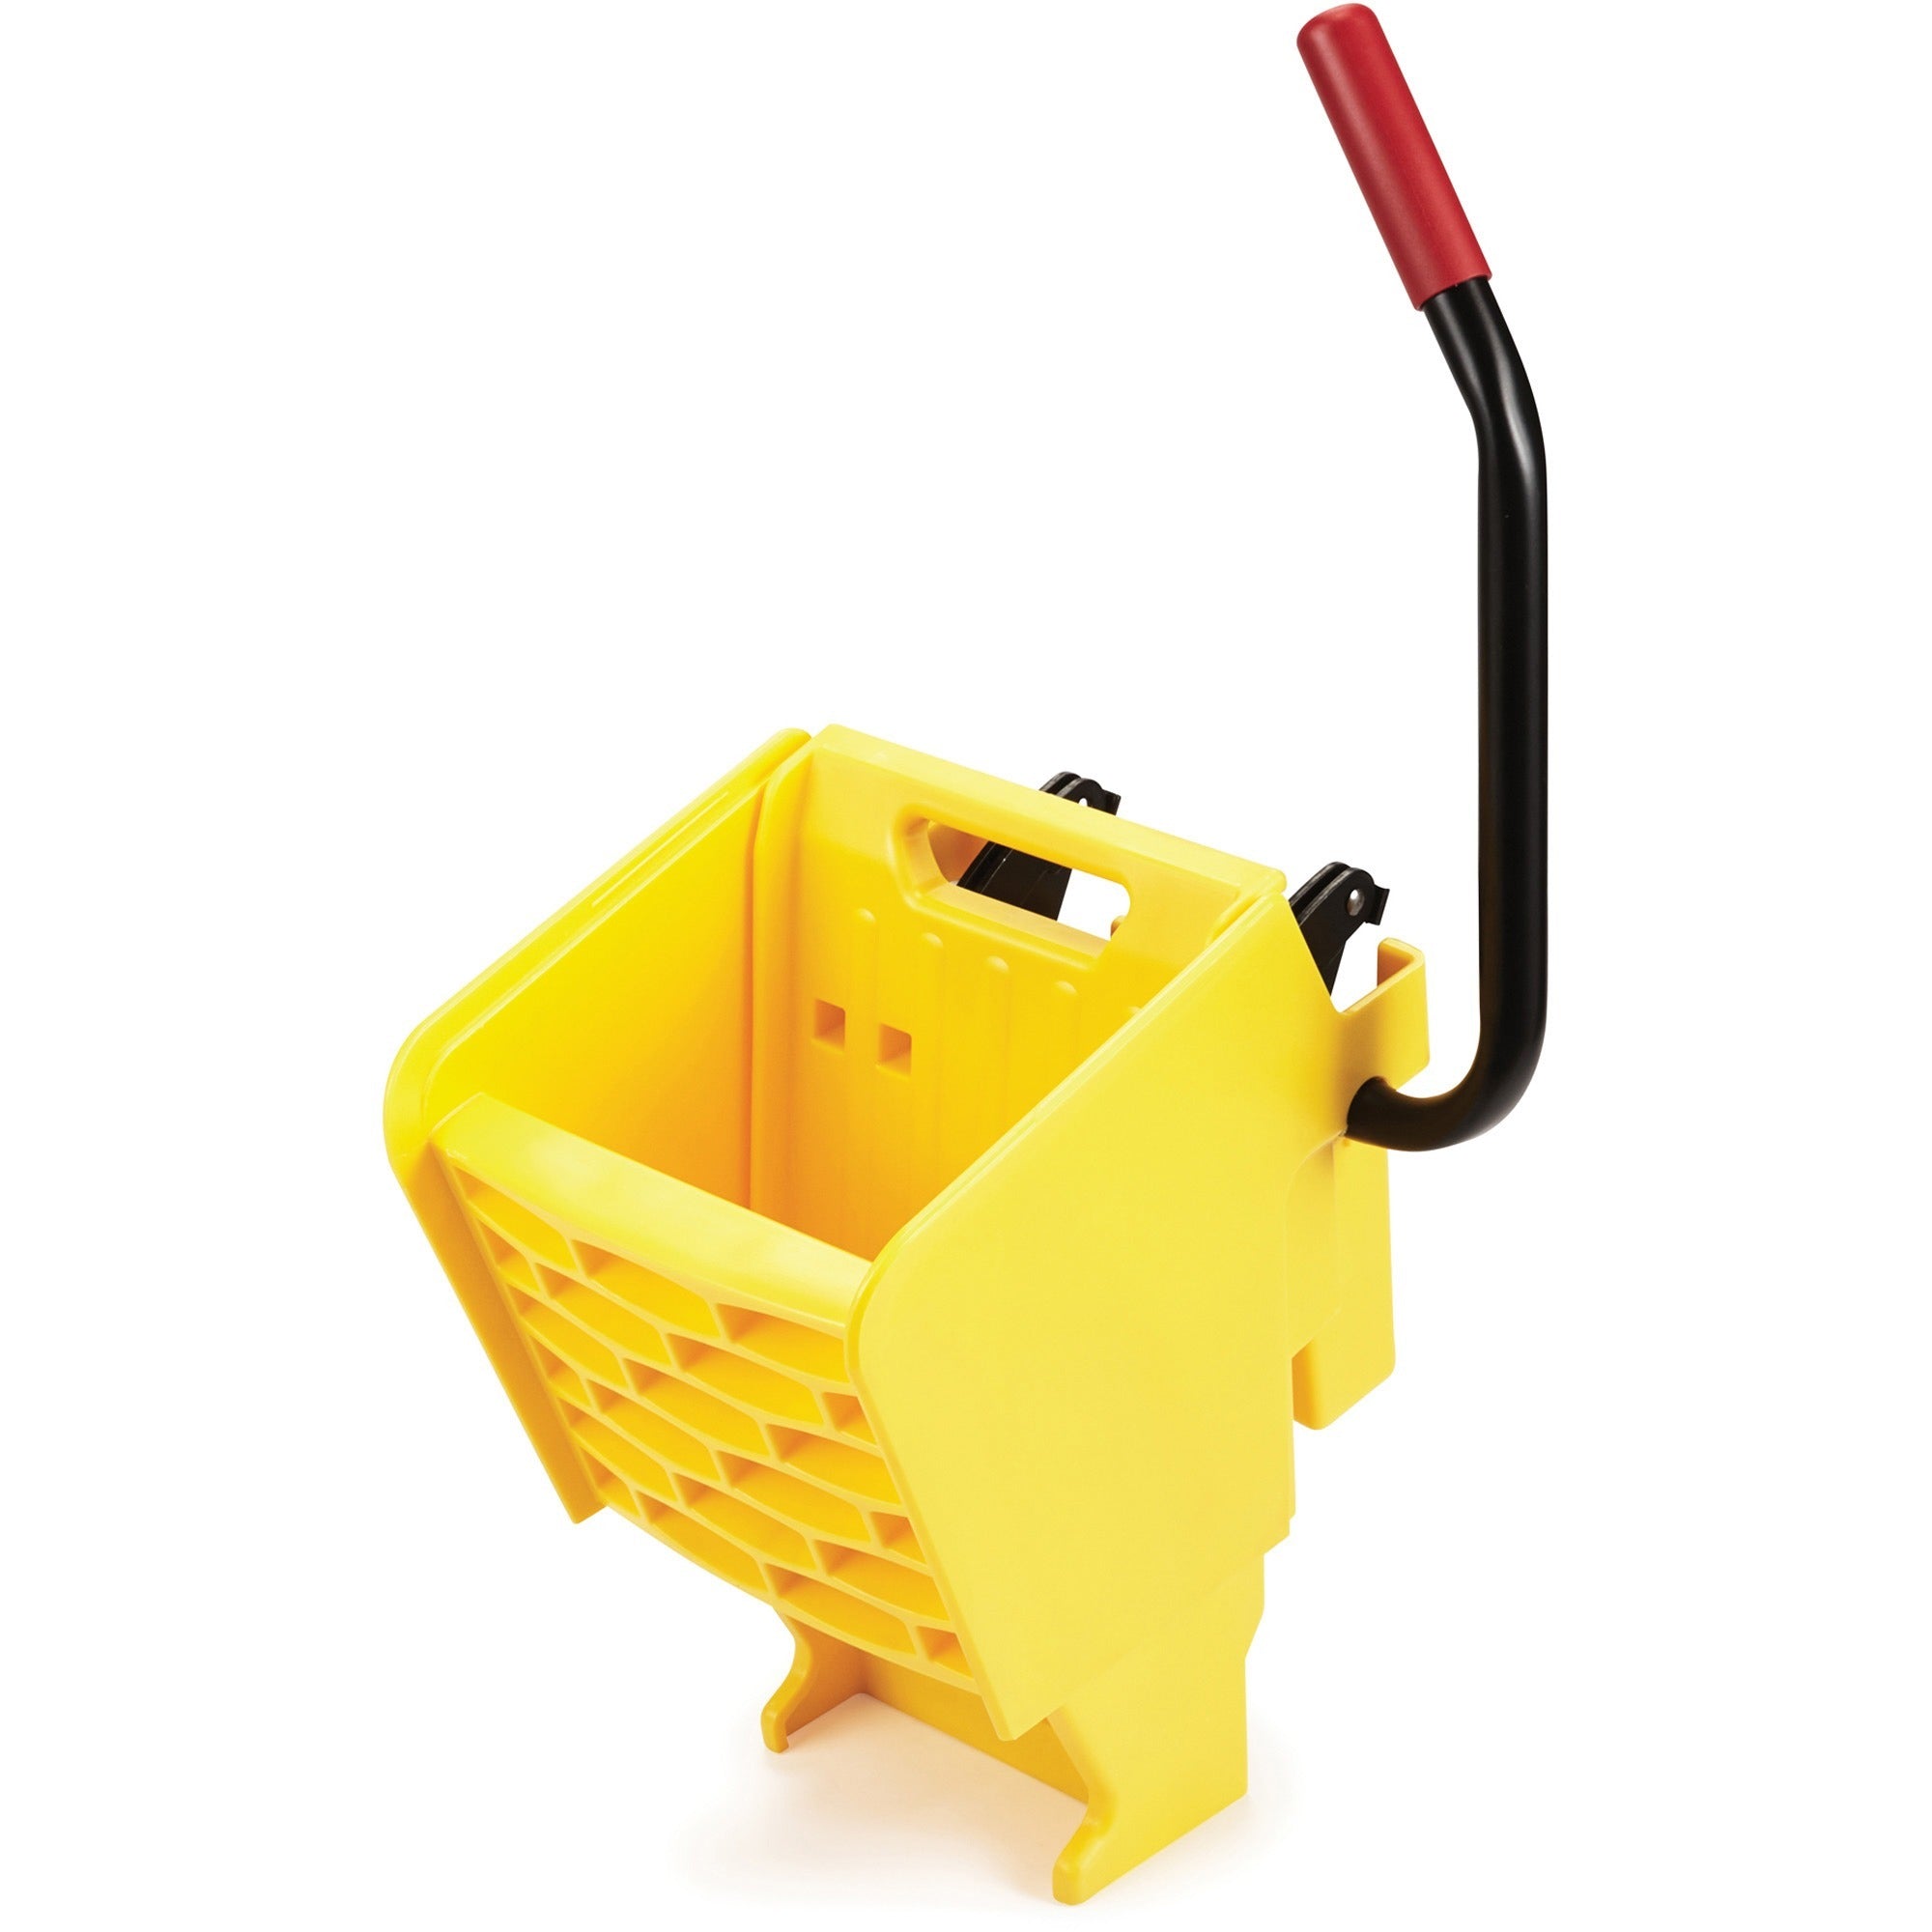 rubbermaid-commercial-wavebrake-side-press-wringer-134-width-x-158-depth-x-311-height-2-carton-yellow-steel-plastic_rcp2064915ct - 1